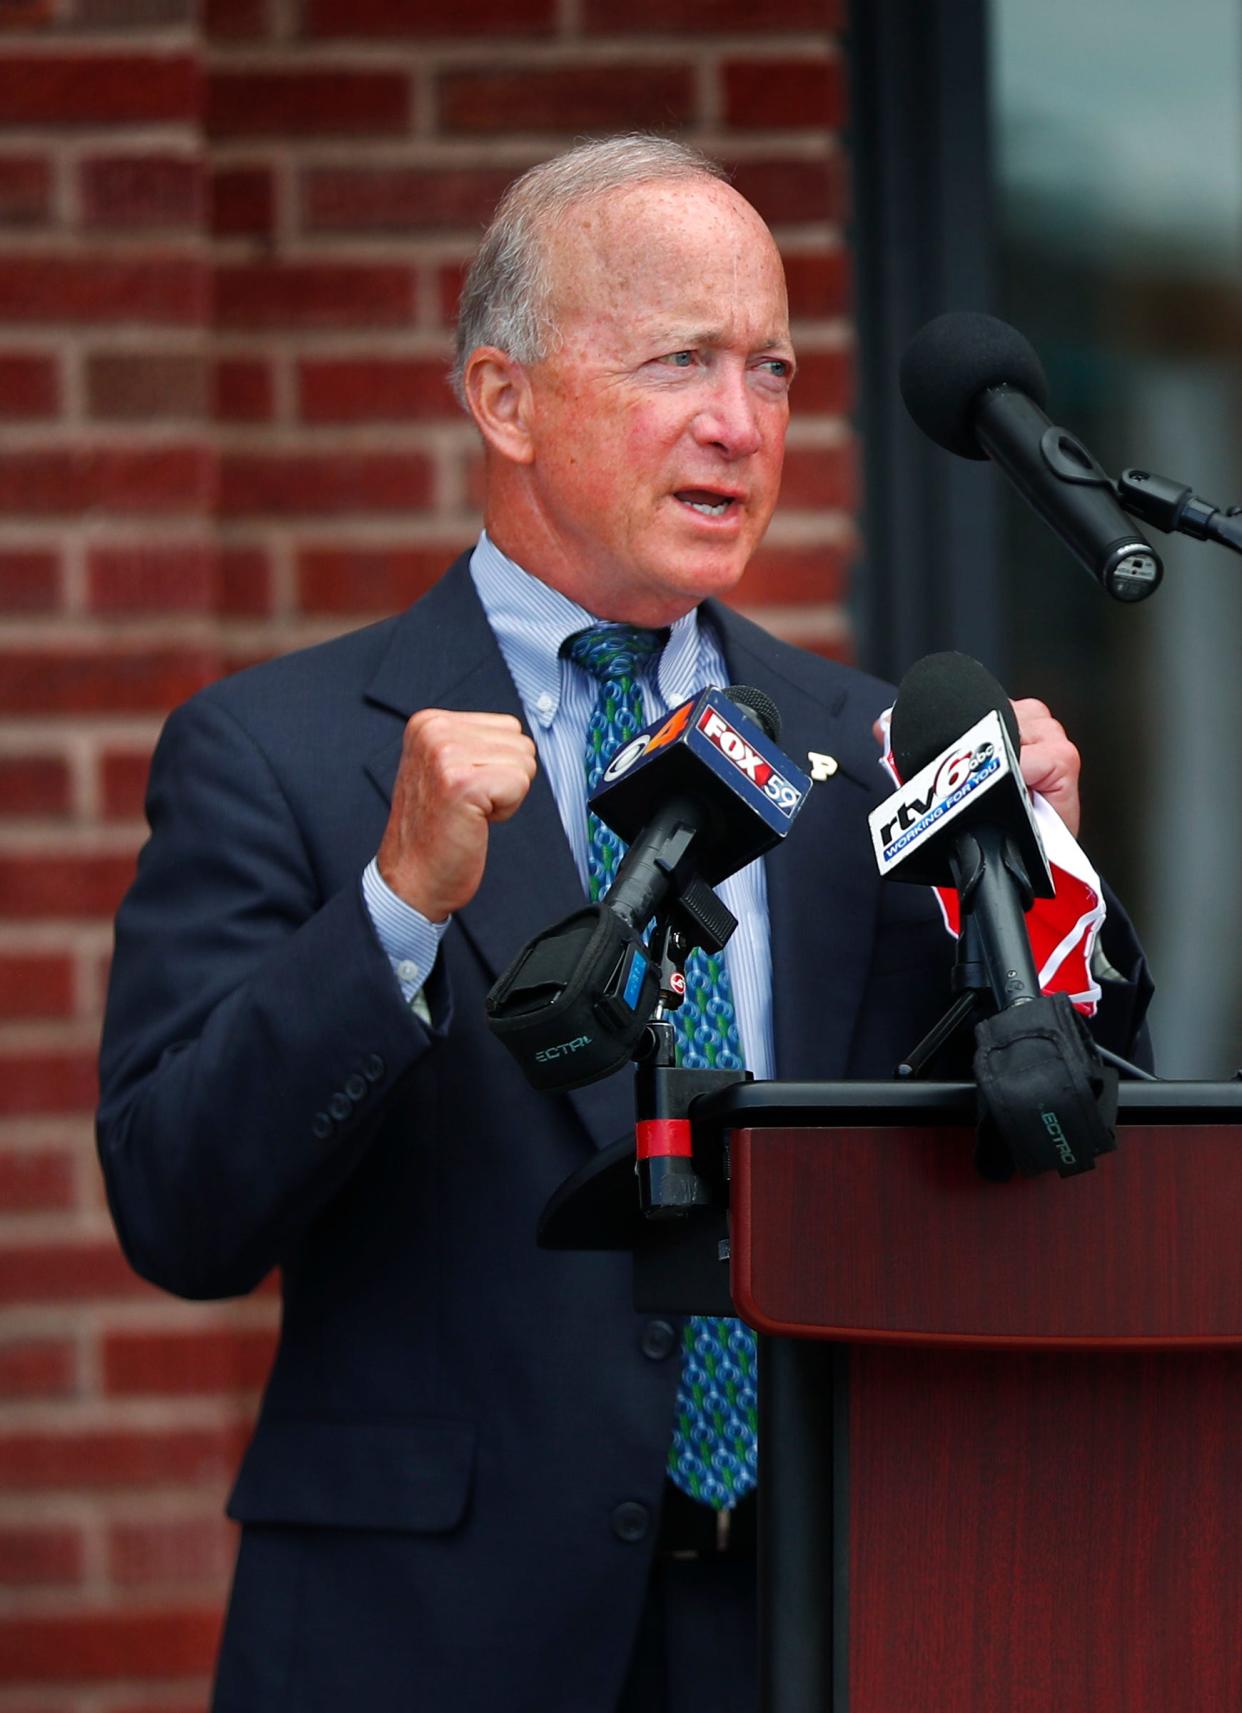 Purdue University President Mitch Daniels speaks during the grand opening of the new Purdue Polytechnic High School and Paramount Englewood in the P.R. Mallory Building at 3029 E. Washington St., Monday, July 20, 2020.